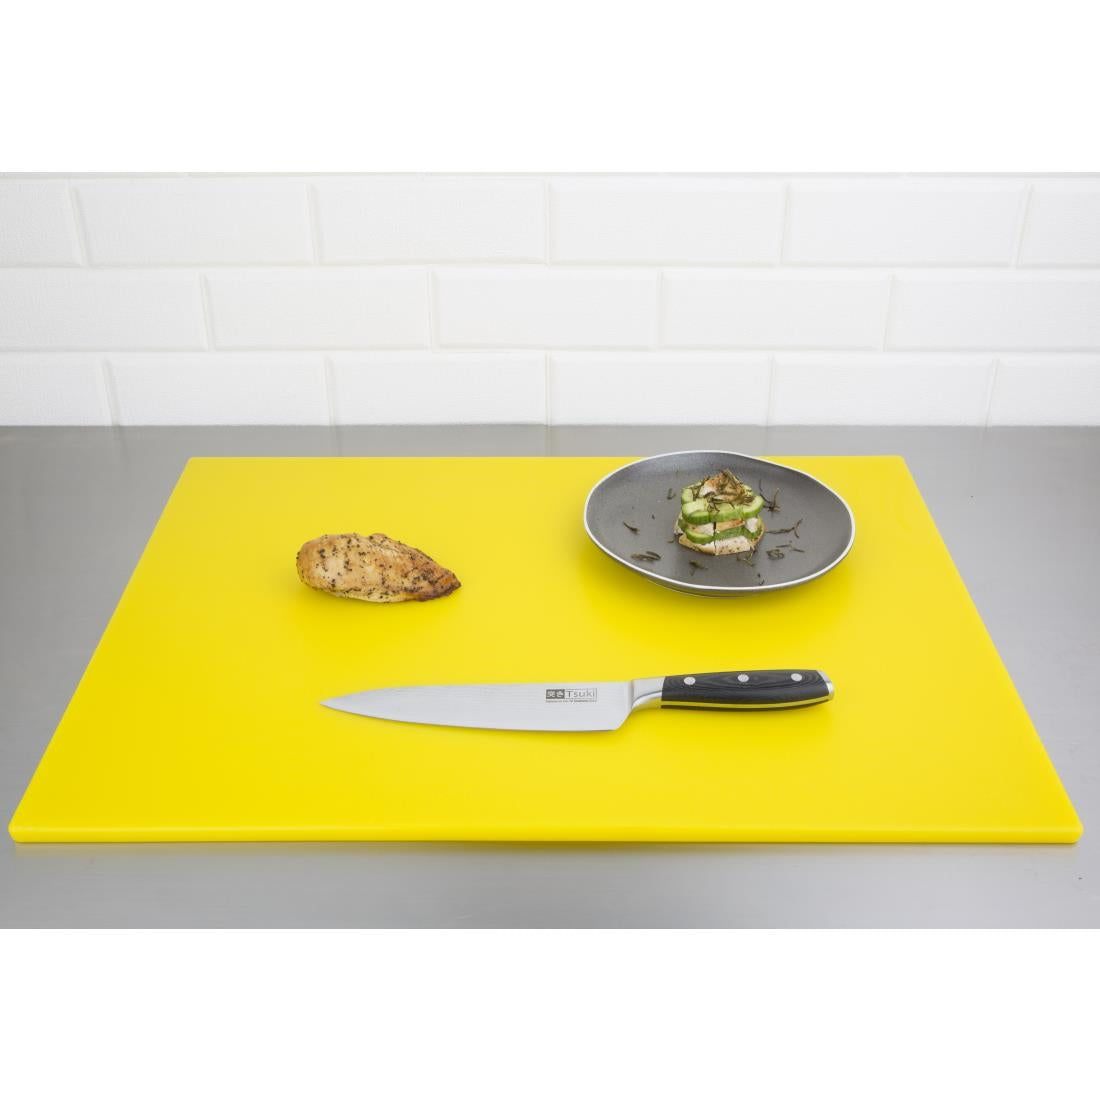 Hygiplas Low Density Yellow Chopping Board Large JD Catering Equipment Solutions Ltd